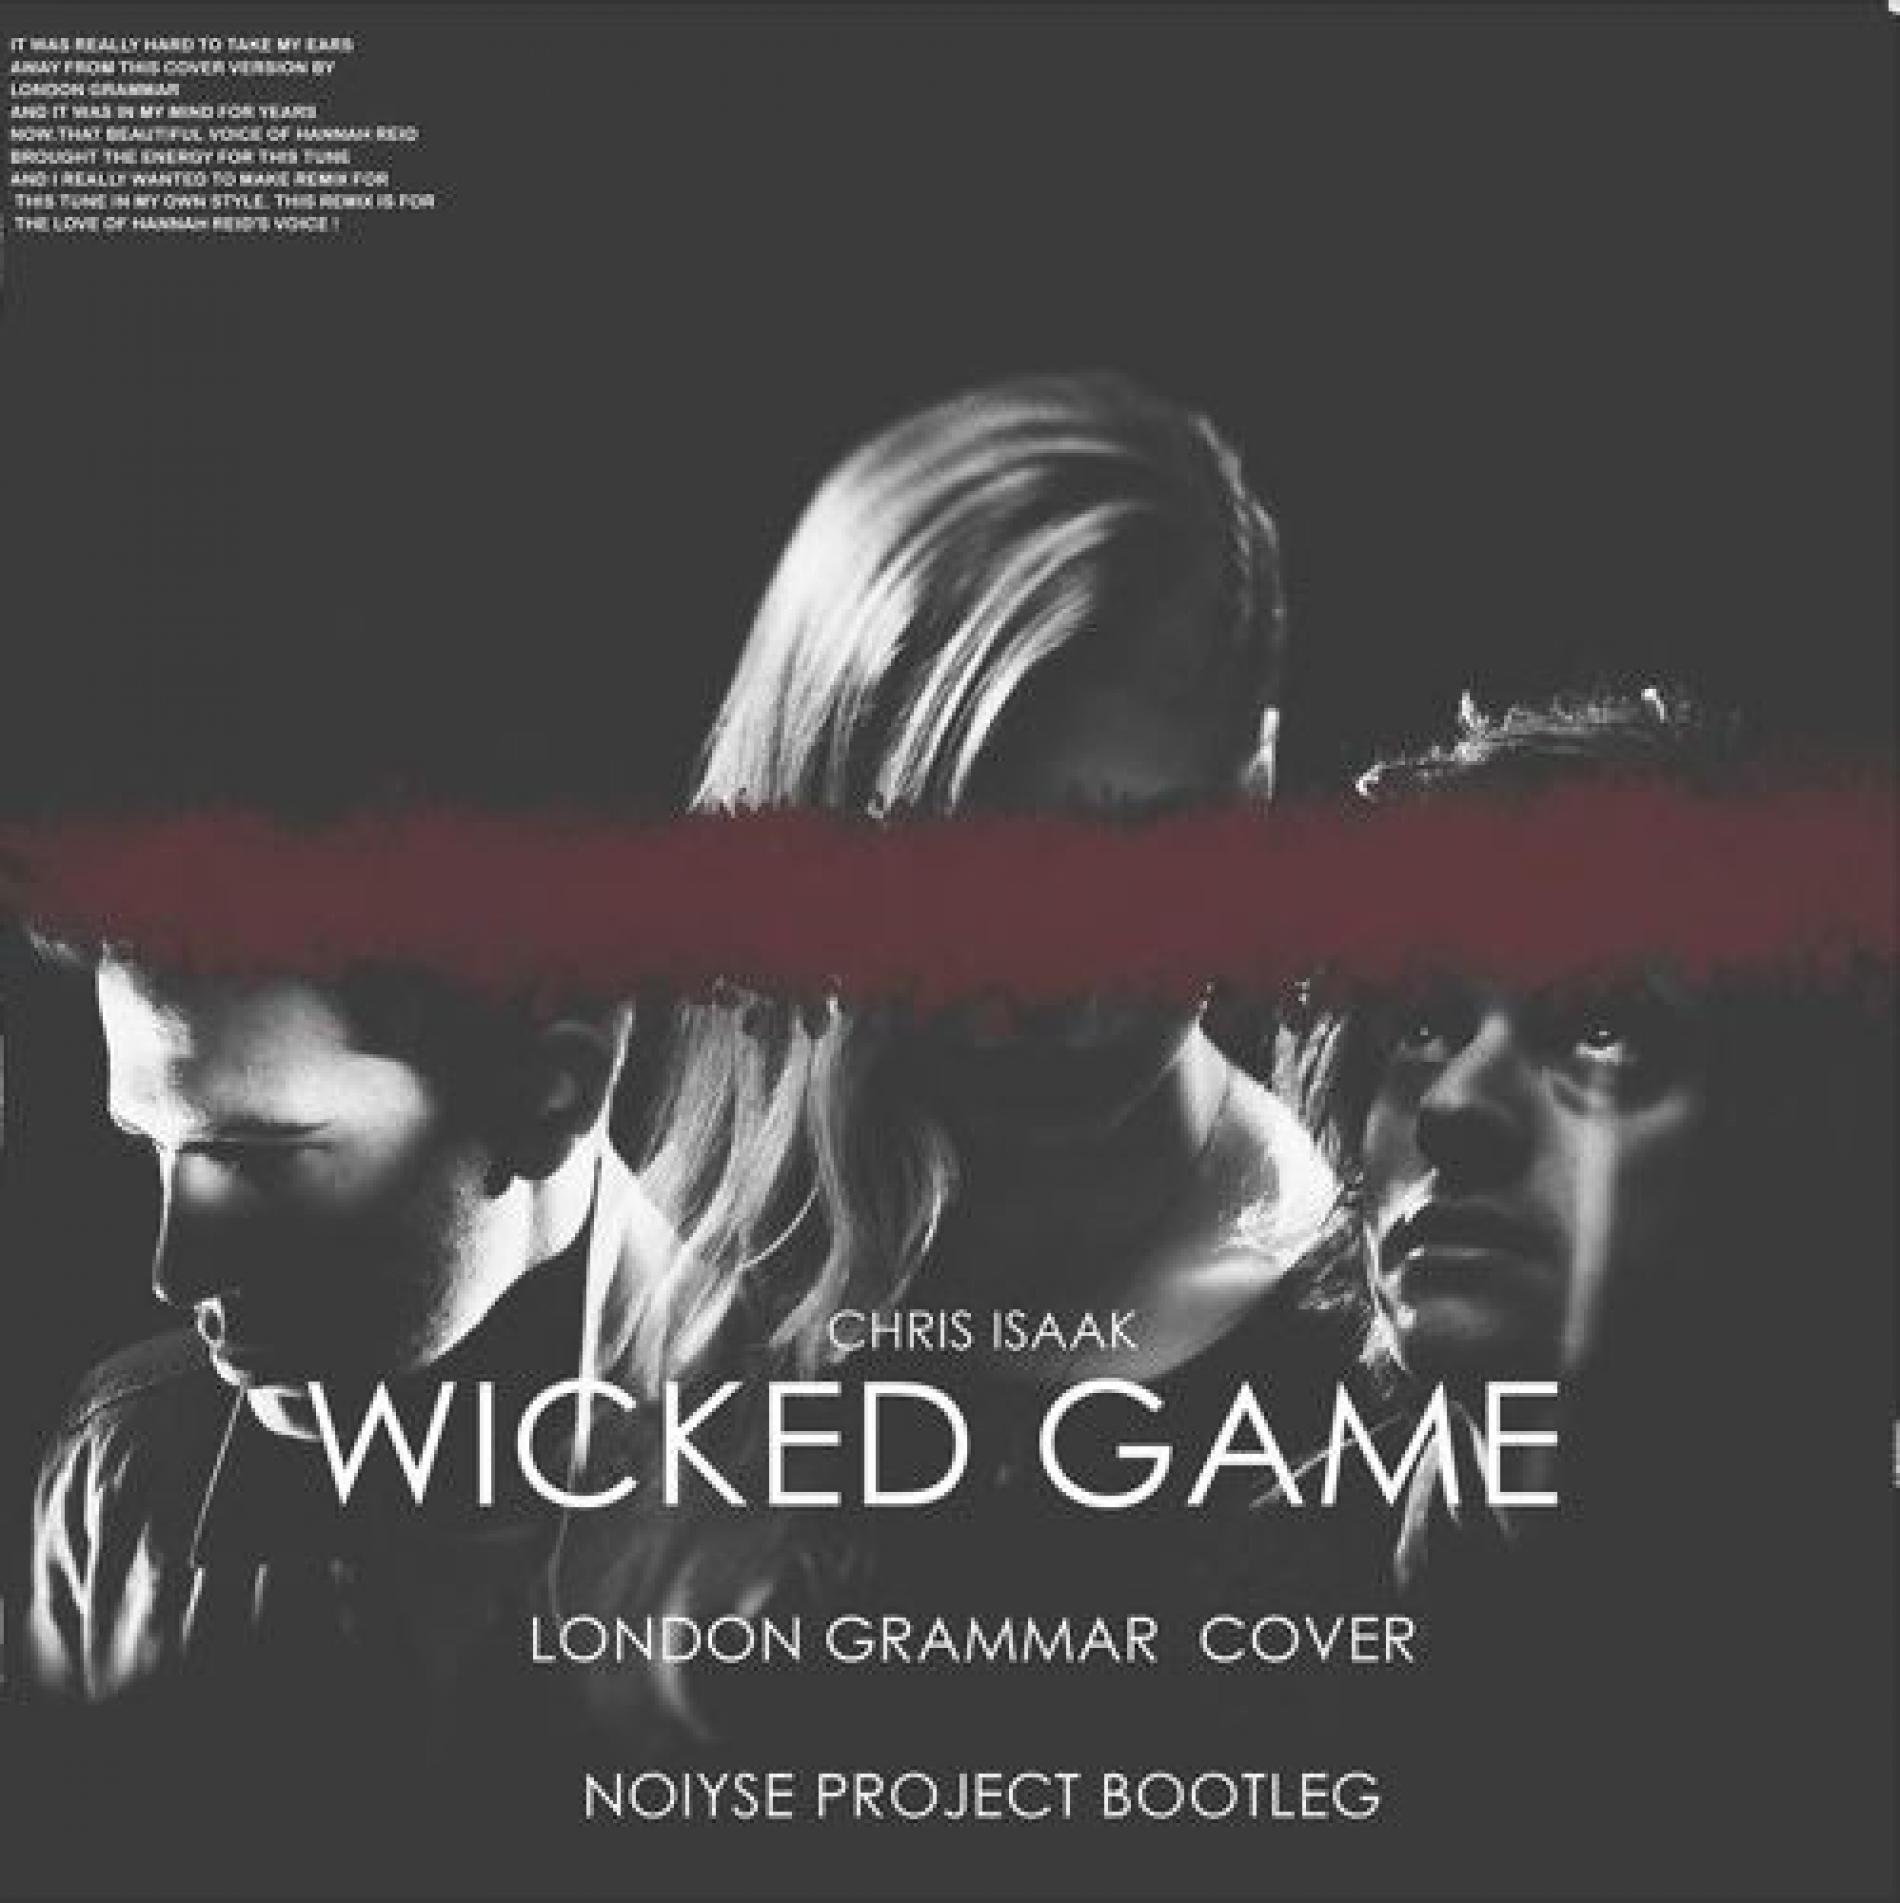 FREE DOWNLOAD: Chris Isaak – Wicked Game – London Grammar Cover (Noiyse Project Bootleg)